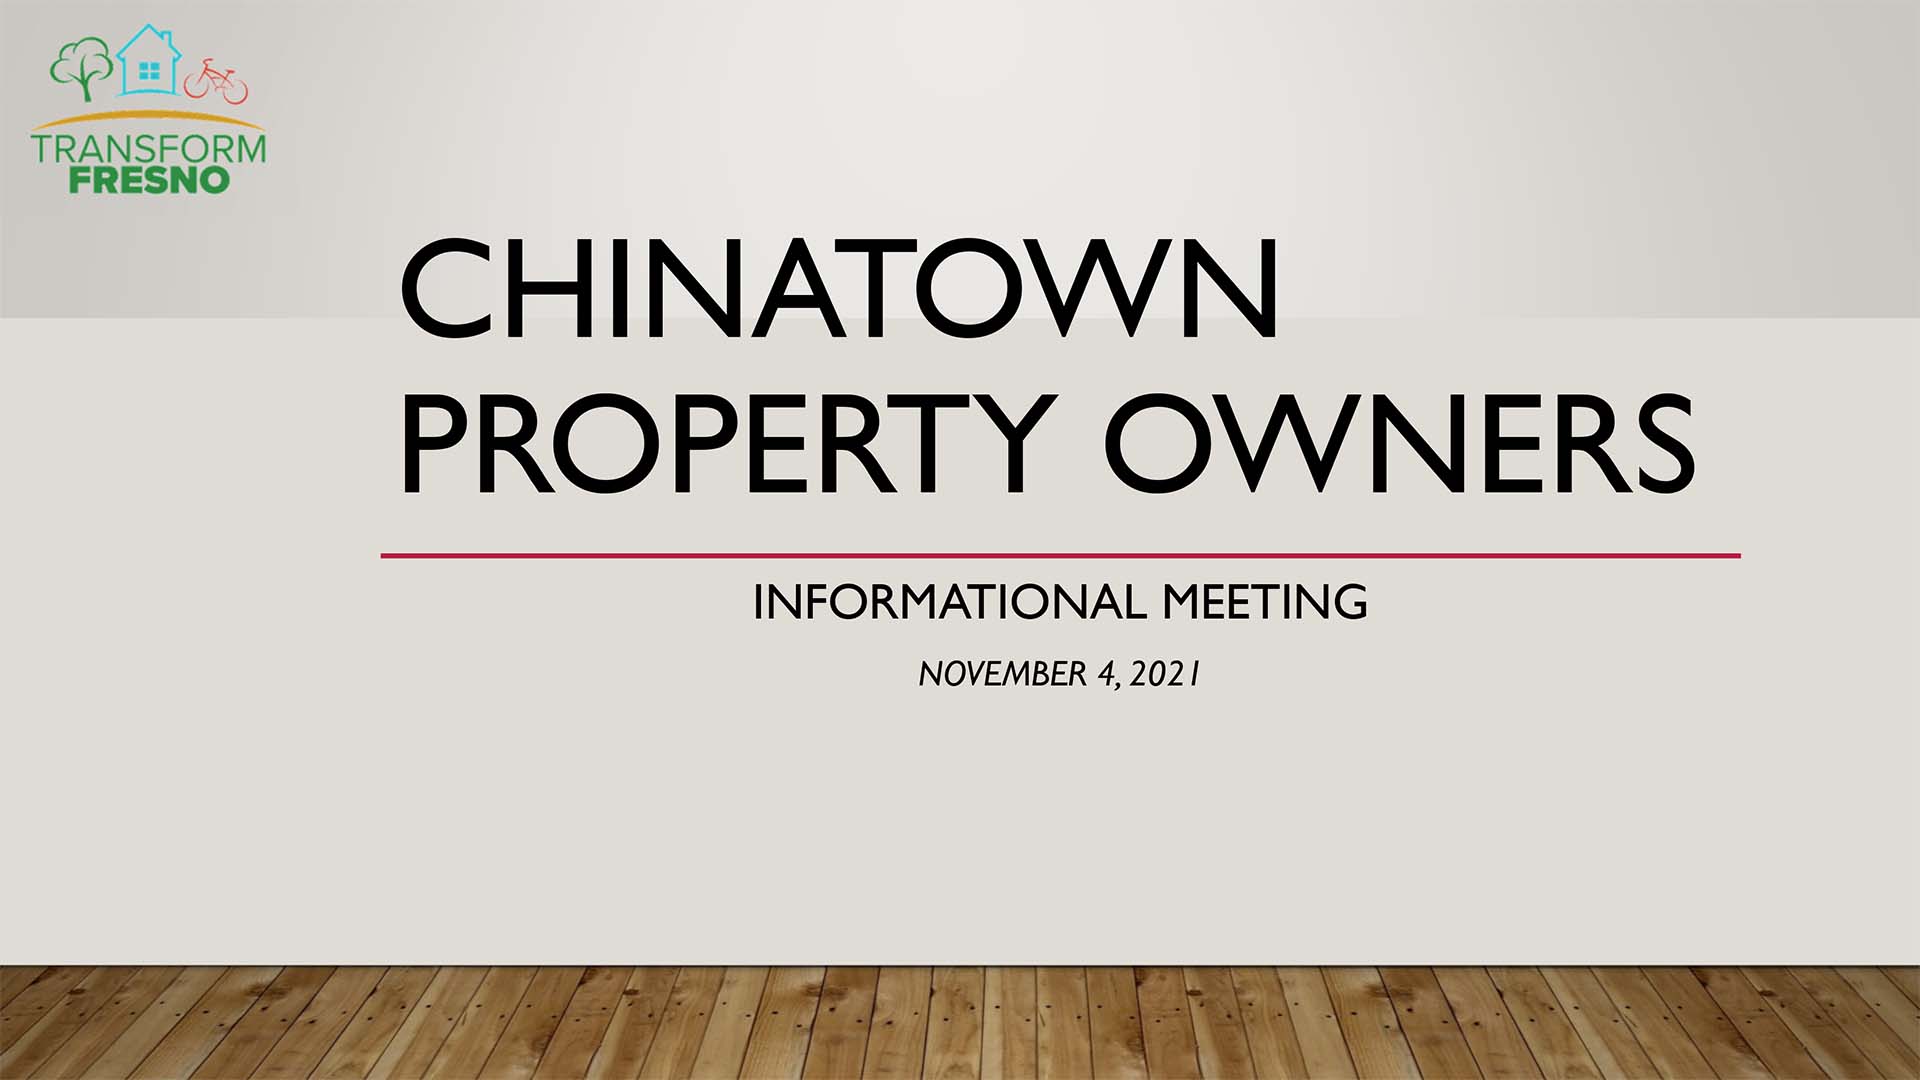 Fresno Chinatown Property Owners Meeting